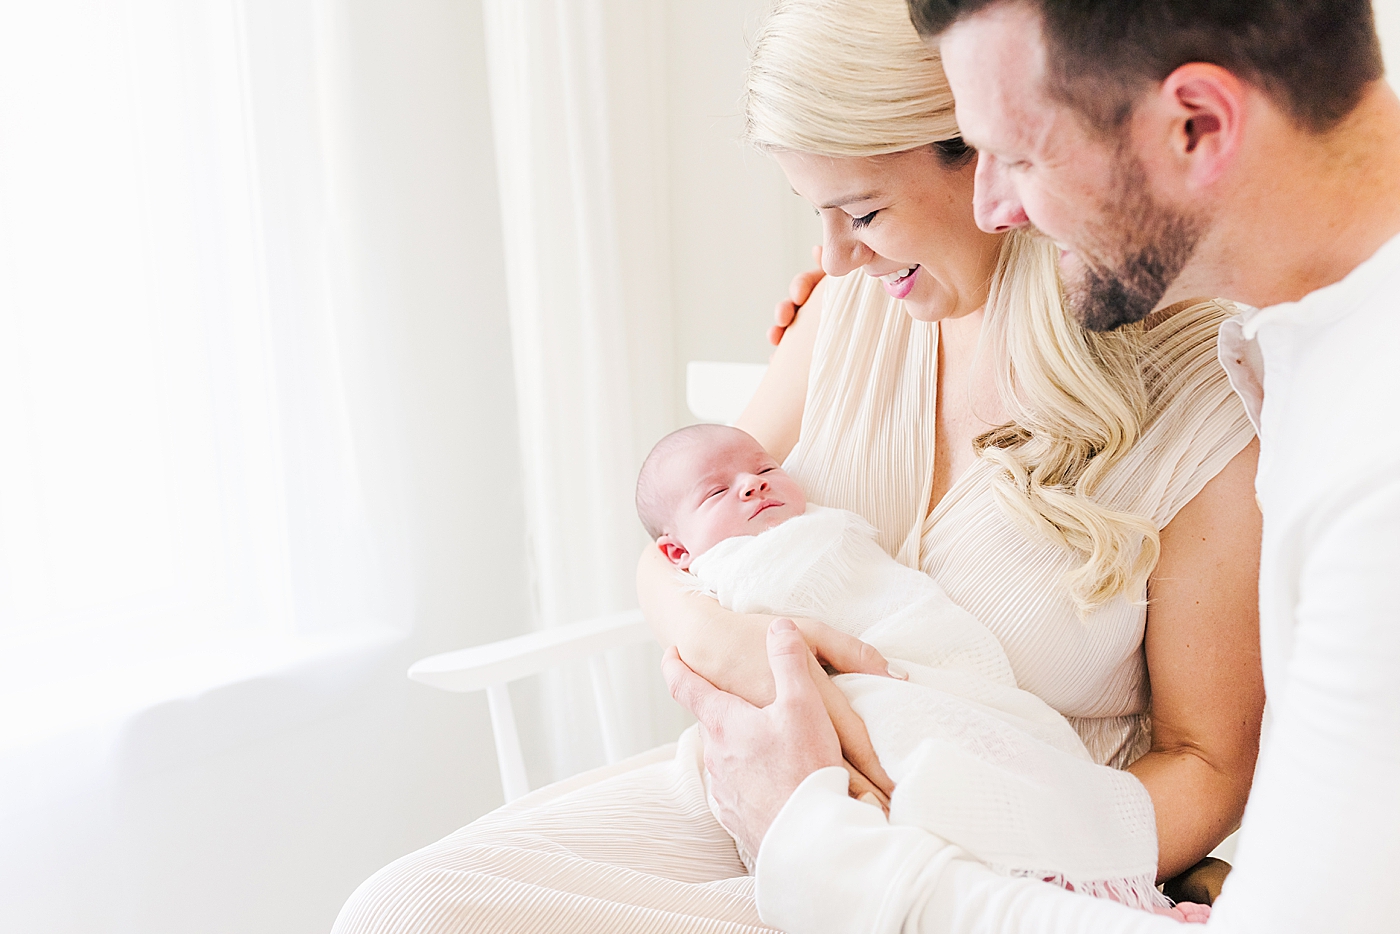 Mom and dad snuggling with their new baby | Photo by Ballantyne newborn photographer Anna Wisjo 